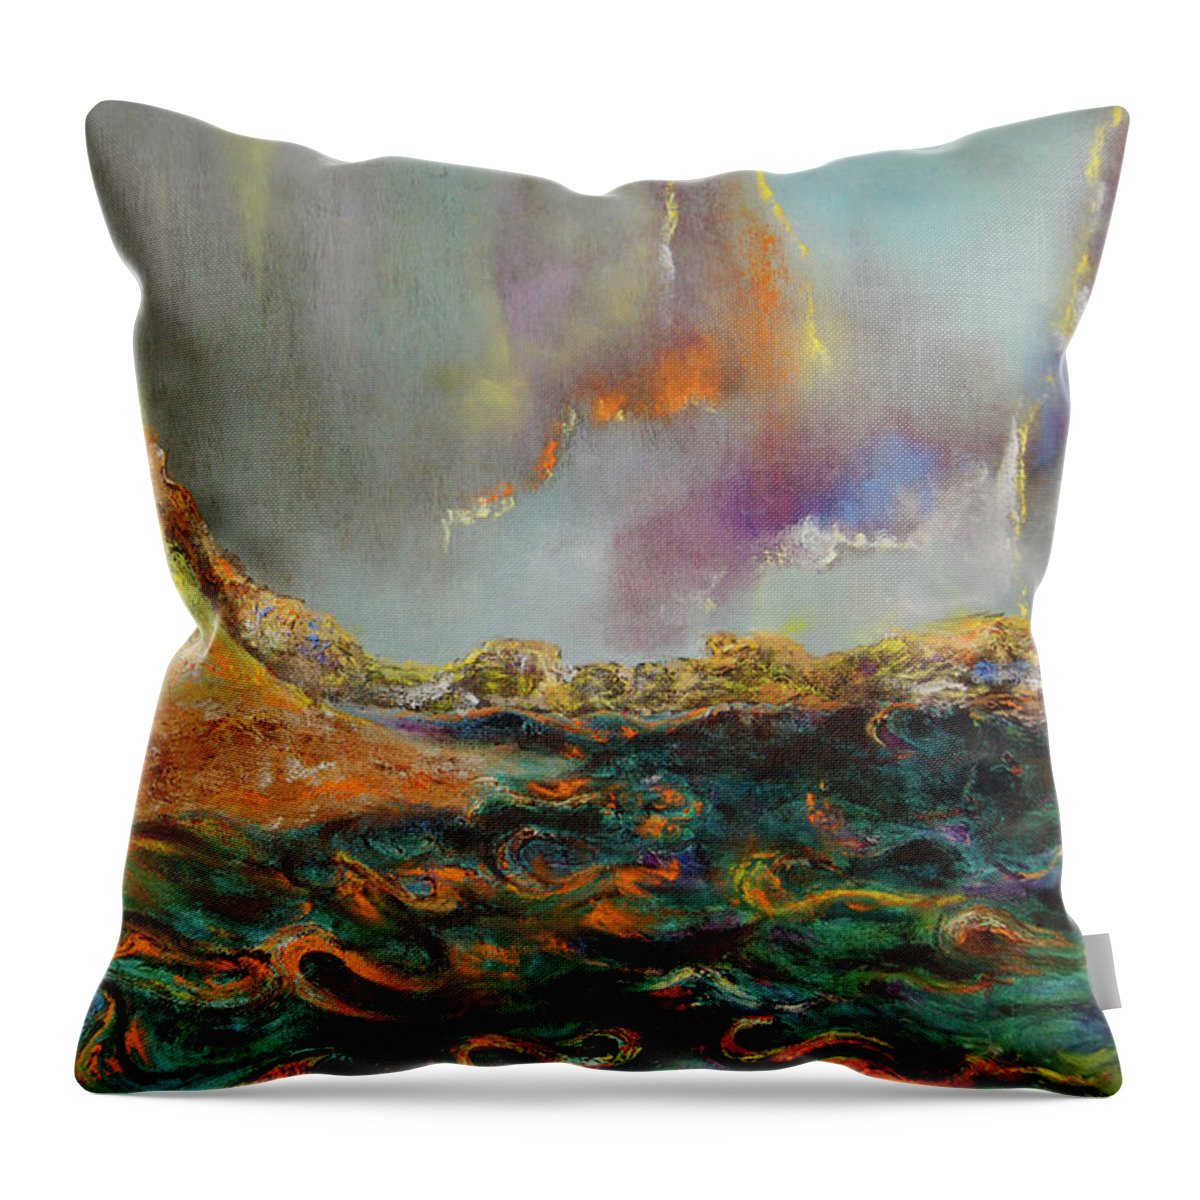 Seascape Throw Pillow featuring the painting Protected by Anitra Handley-Boyt